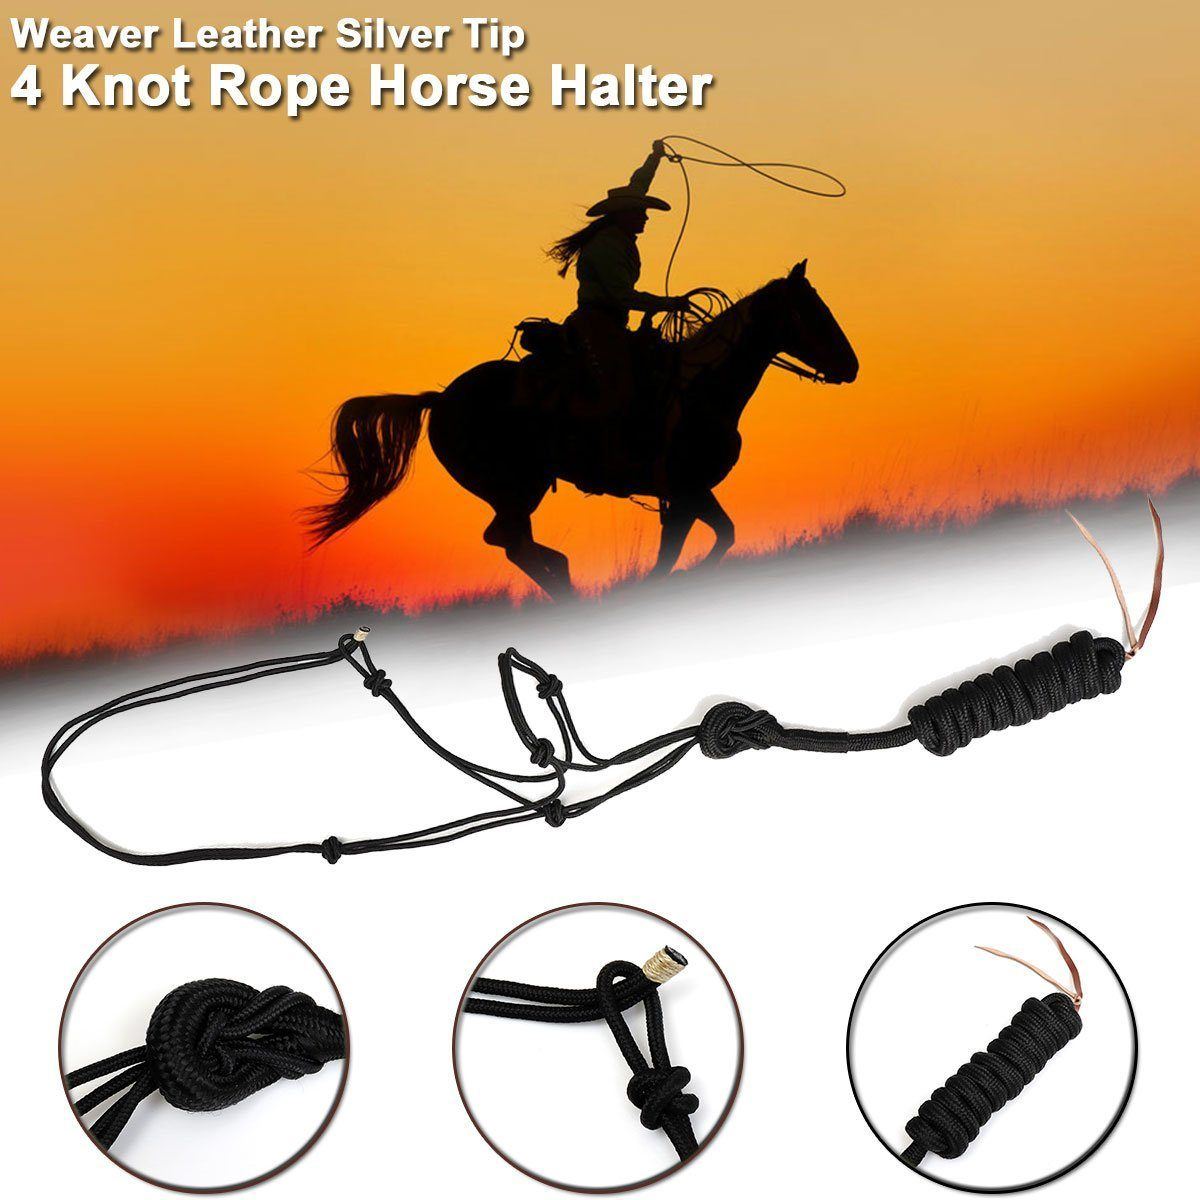 Weaver Leather Silver Tip 4 Knot Rope Horse Halter